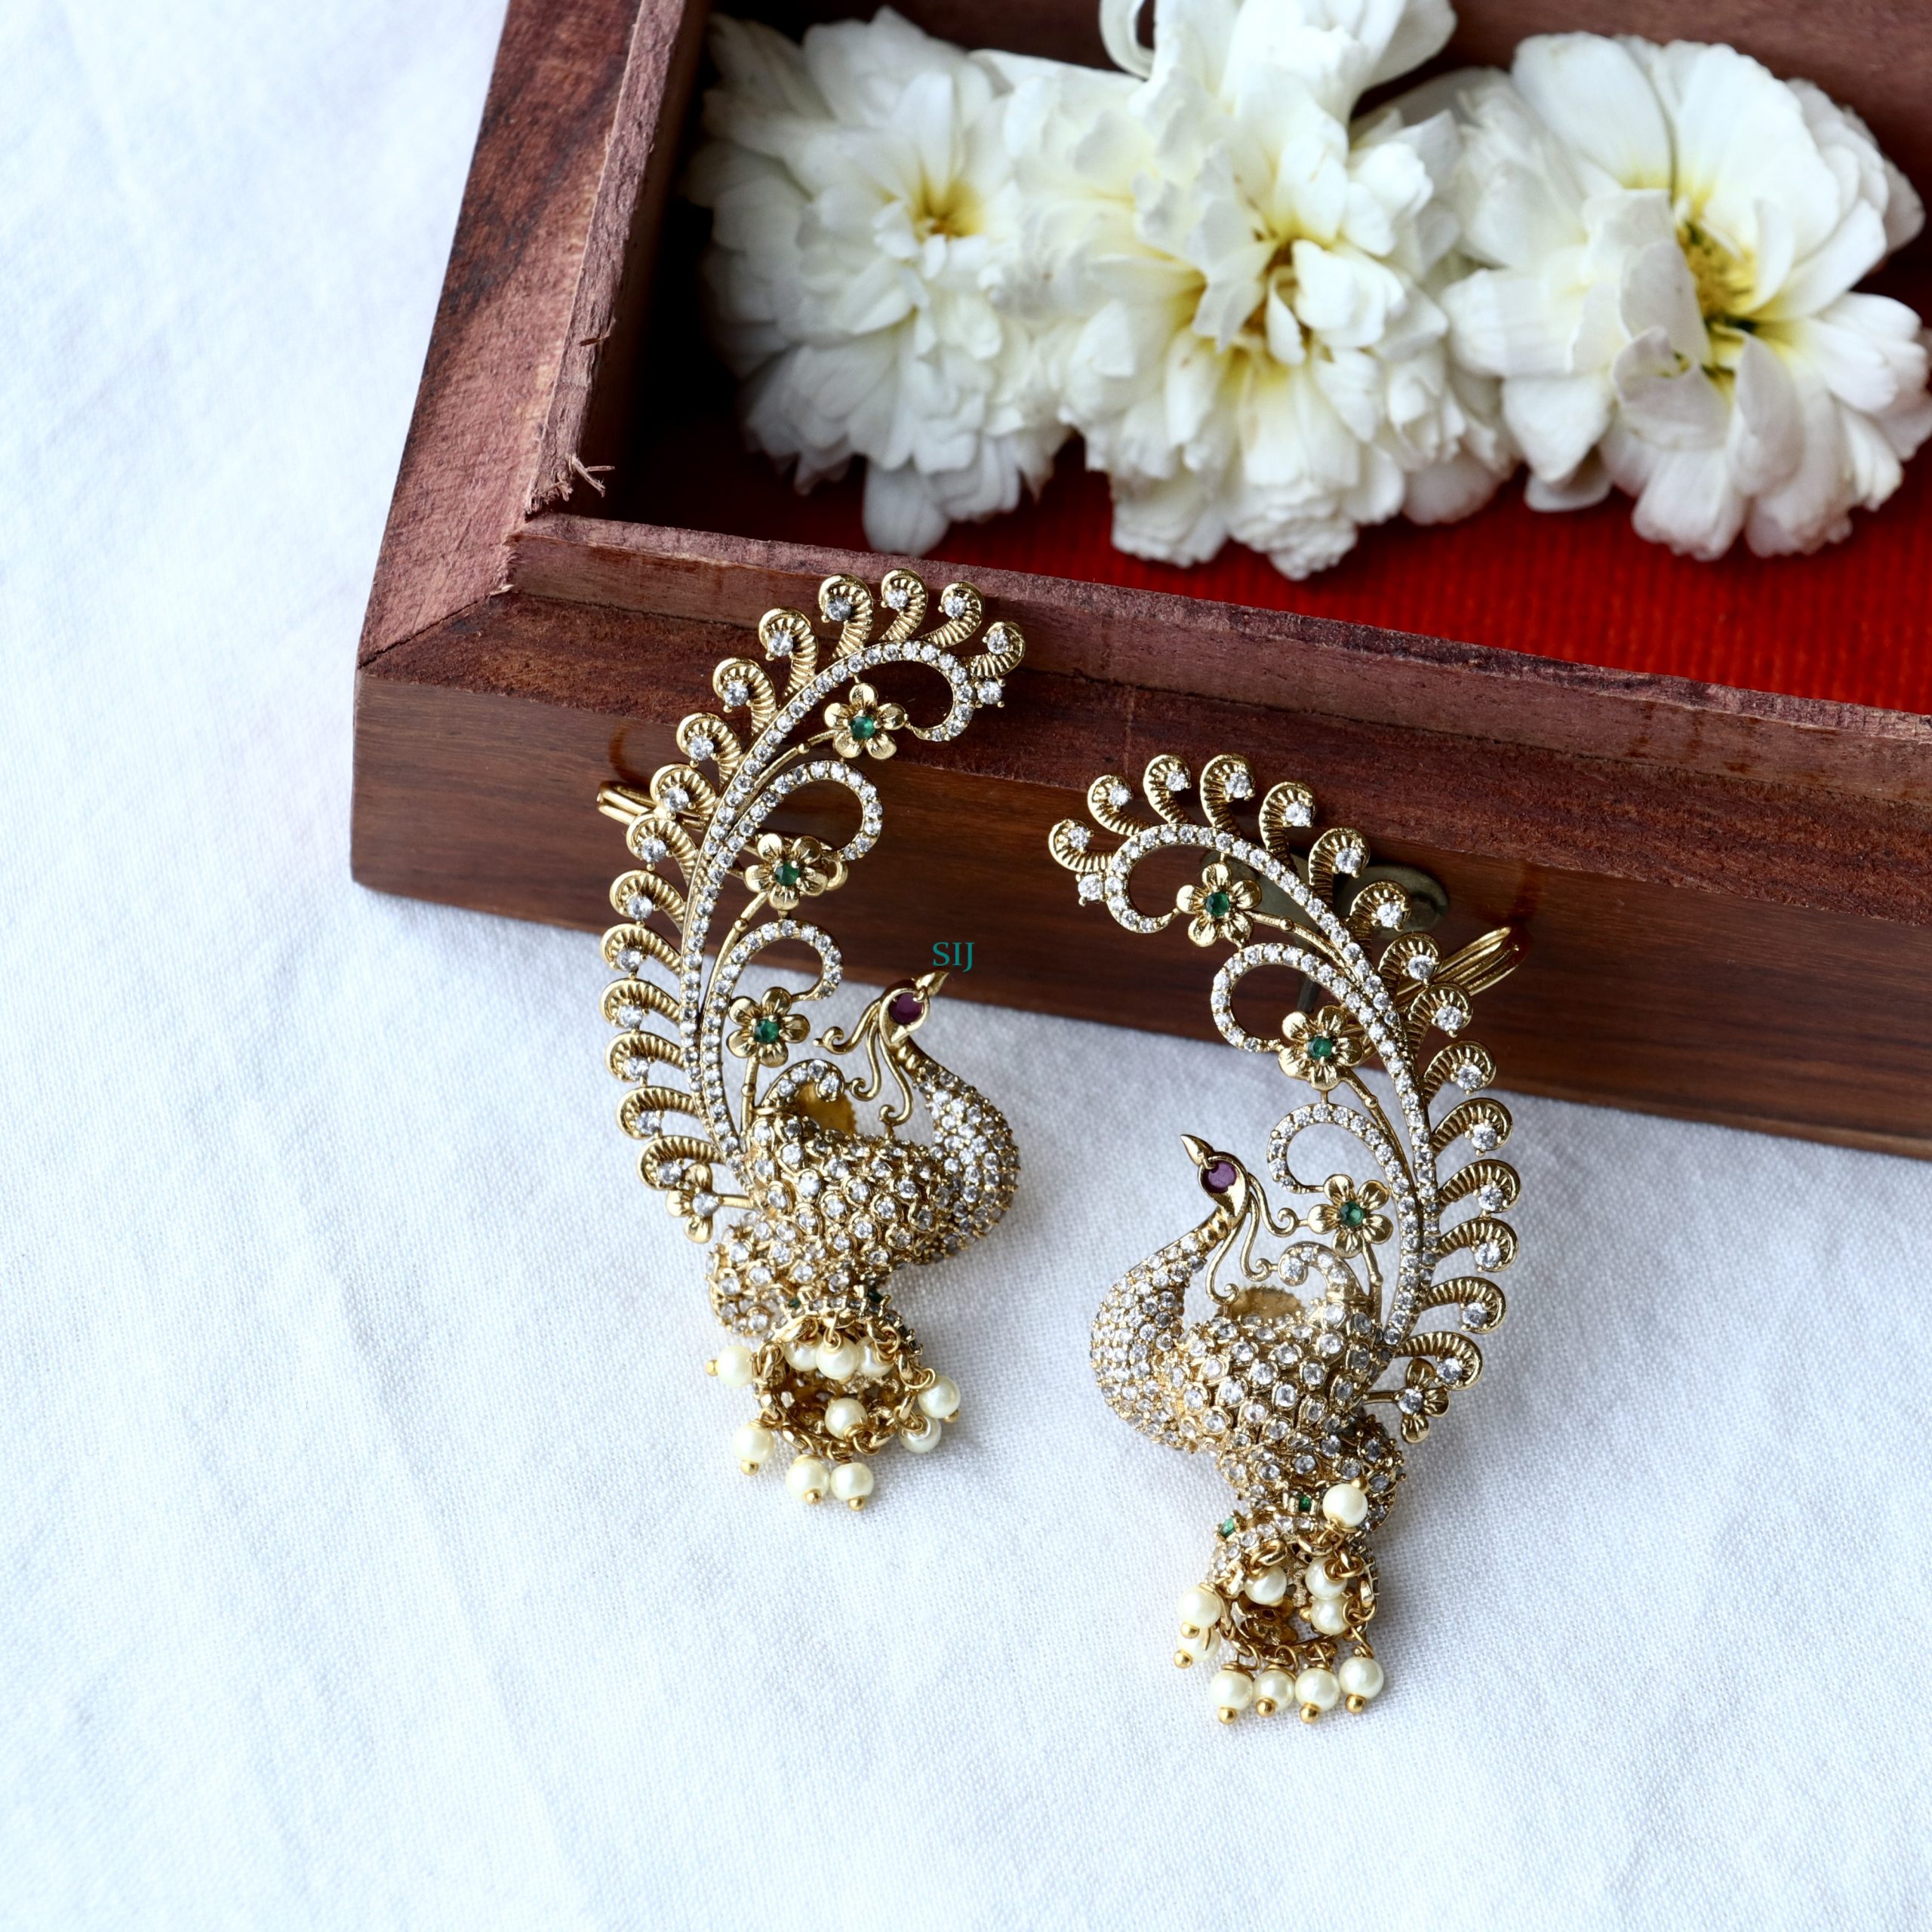 Matte finish flower design earcuff jhumkas embody delicate beauty and modern charm. These earrings feature intricate floral patterns with a matte finish, offering a subtle yet striking allure. The earcuff design adds a contemporary twist, making them a versatile accessory for both casual and formal occasions, enhancing any ensemble with elegance and sophistication.